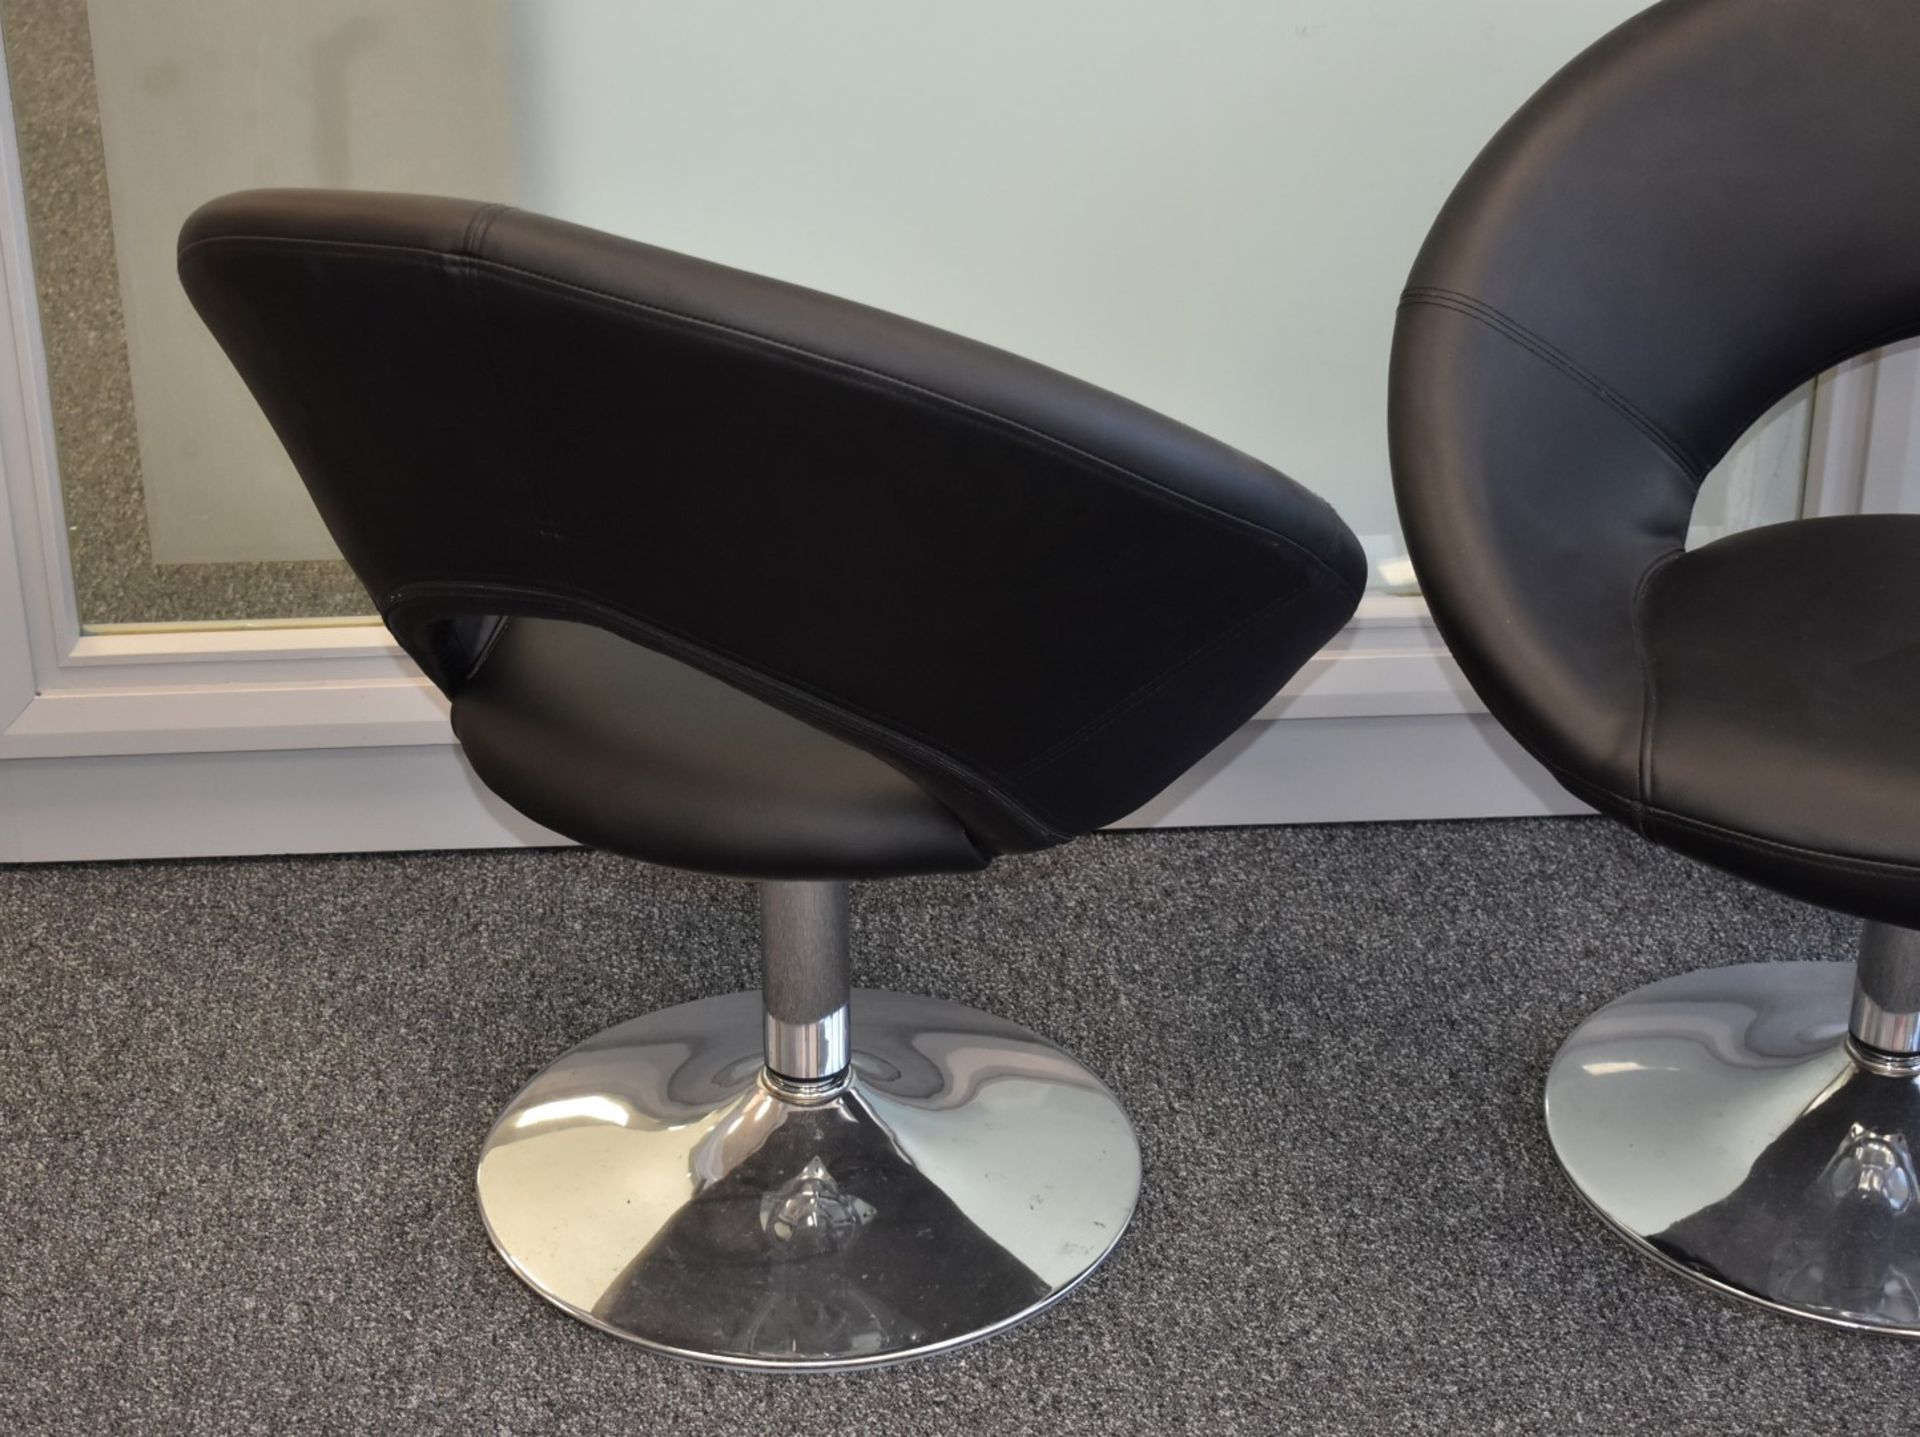 1 x Swivel Tub Chair With Black Faux Leather Upholstery and Chrome Base - 75 cms Wide - Image 5 of 5